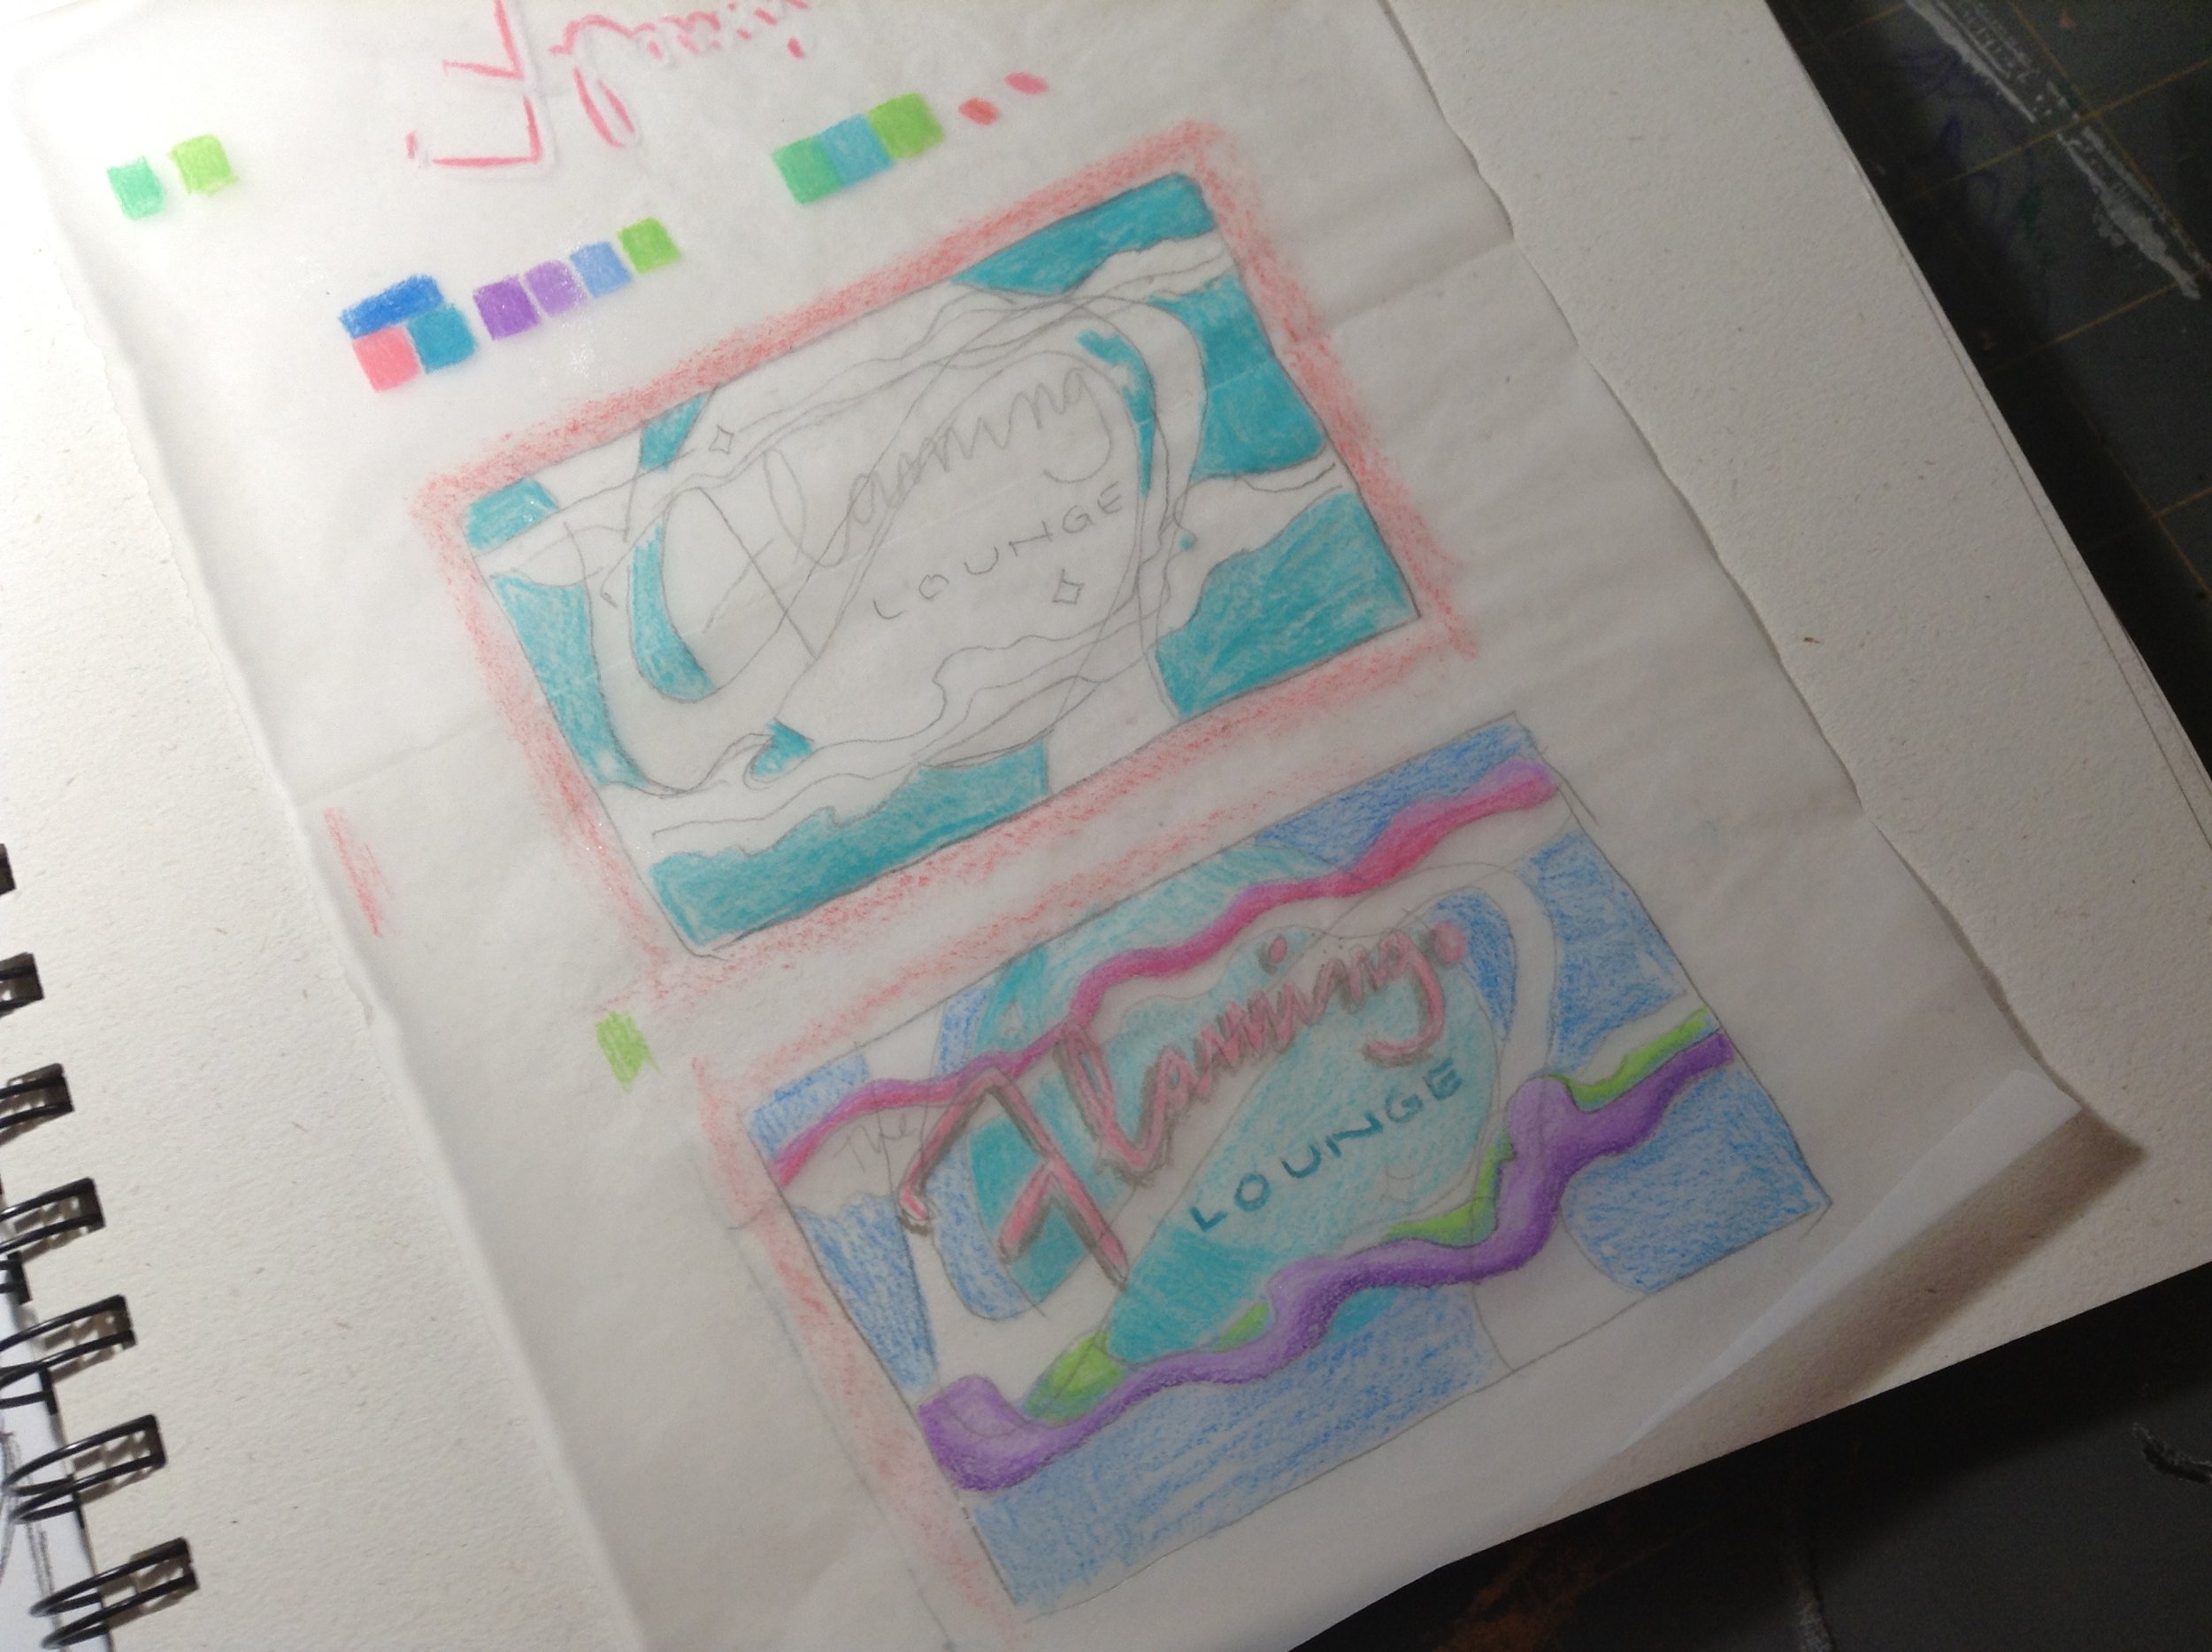  I used colored pencil on tracing paper over a thumbnail sketch to test color combos. 